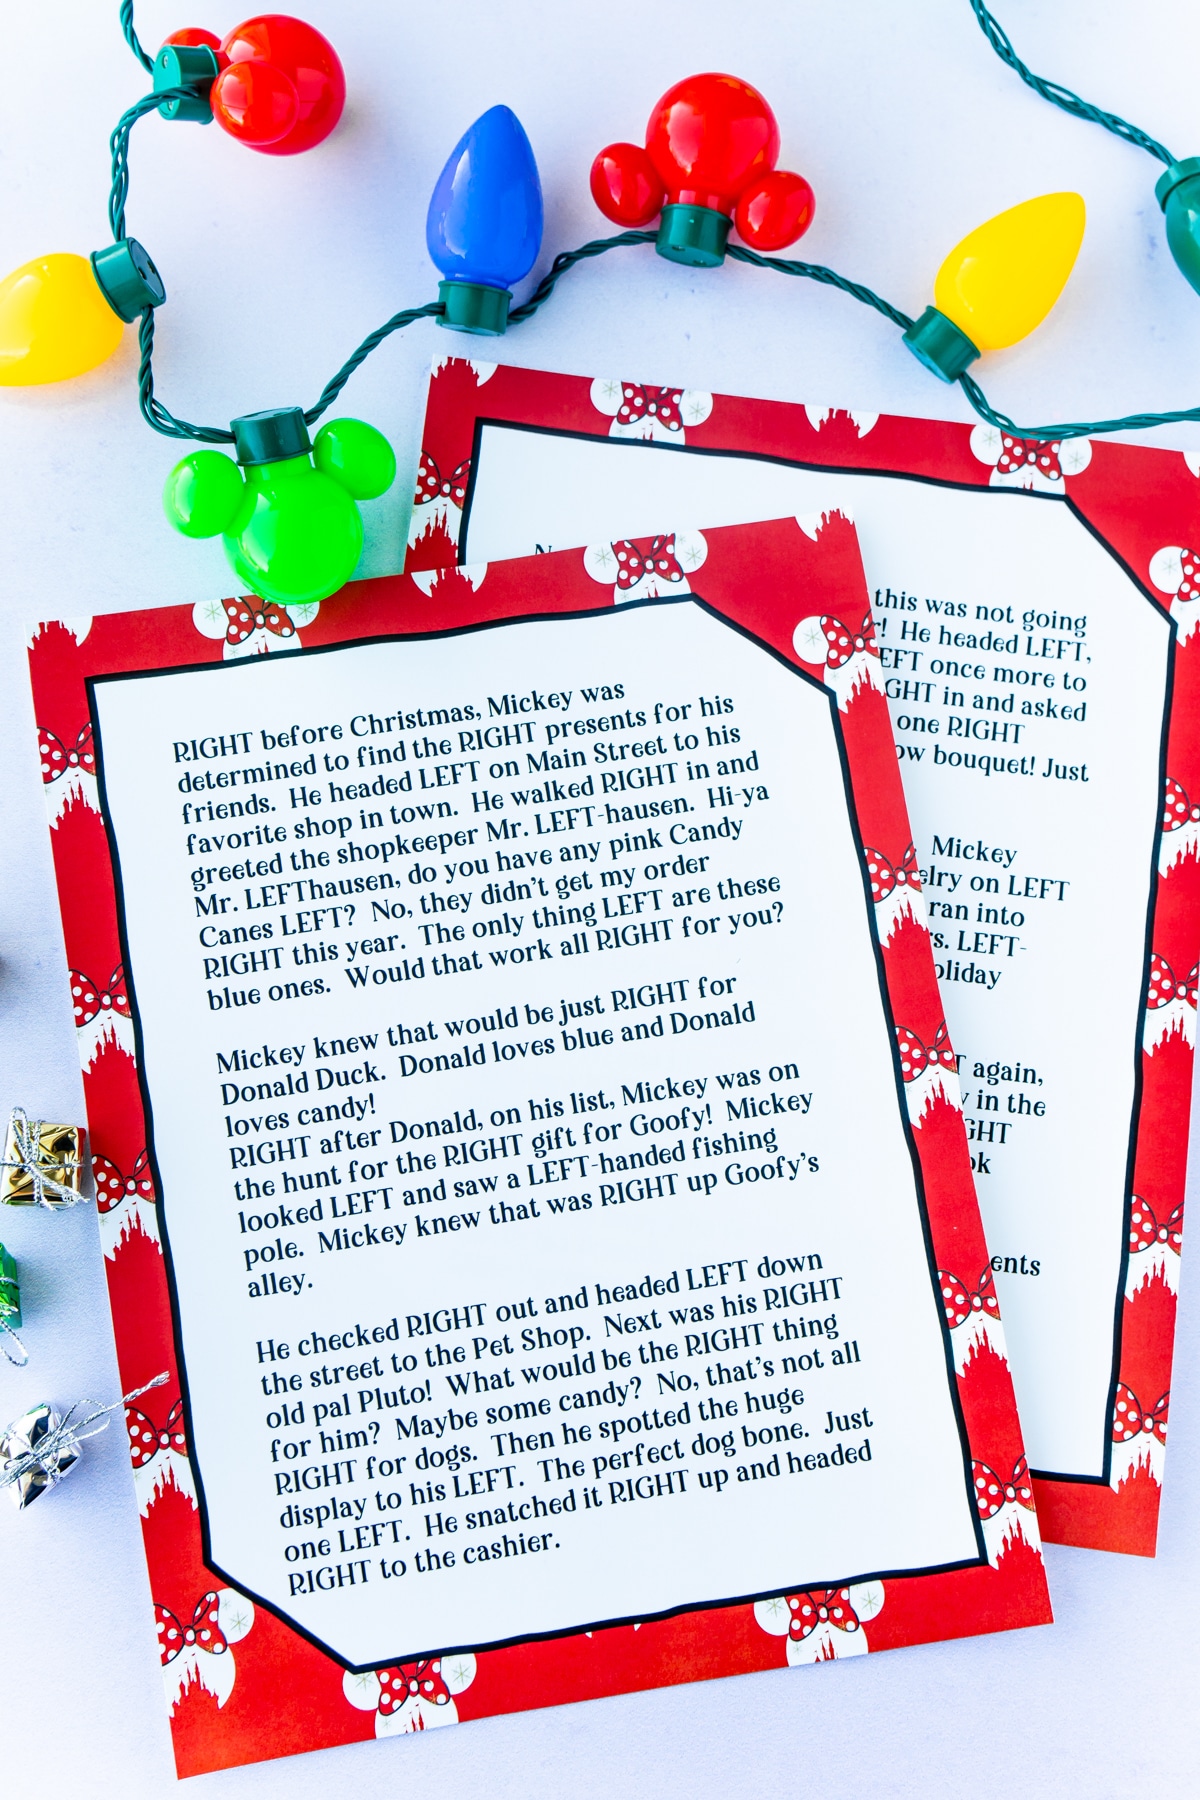 FREE Left Right Across Christmas Game Printable (2 Options!) - Leap of  Faith Crafting